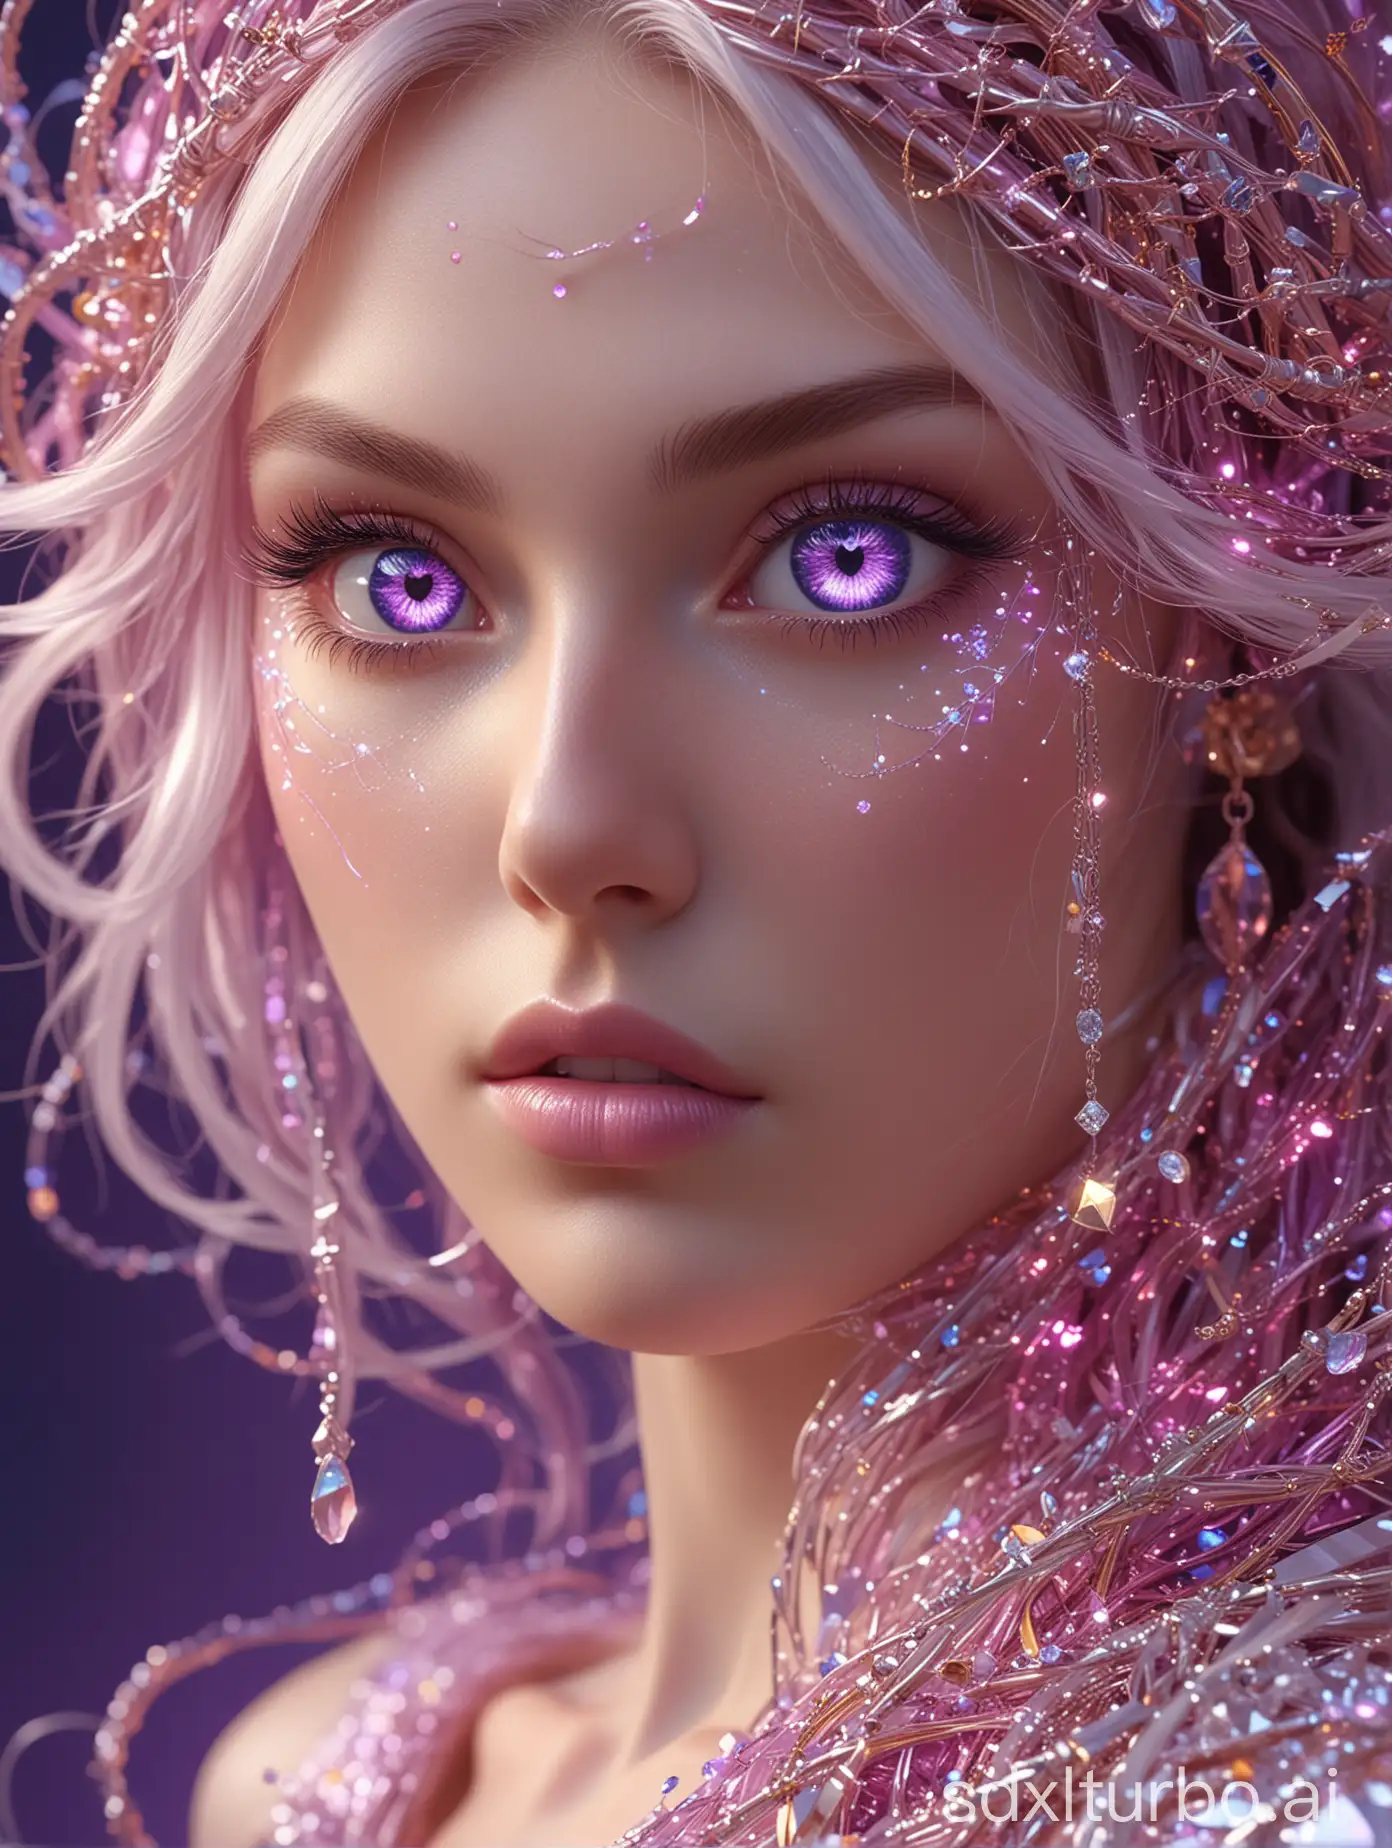 (venus,goddess),(pink and white entanglement),Masterpiece, beautiful details,  uniform 8K wallpaper, high resolution,perfect light,glowing eye,(purple and golden entanglement), (crystal and silver entanglement),Crystal Blue